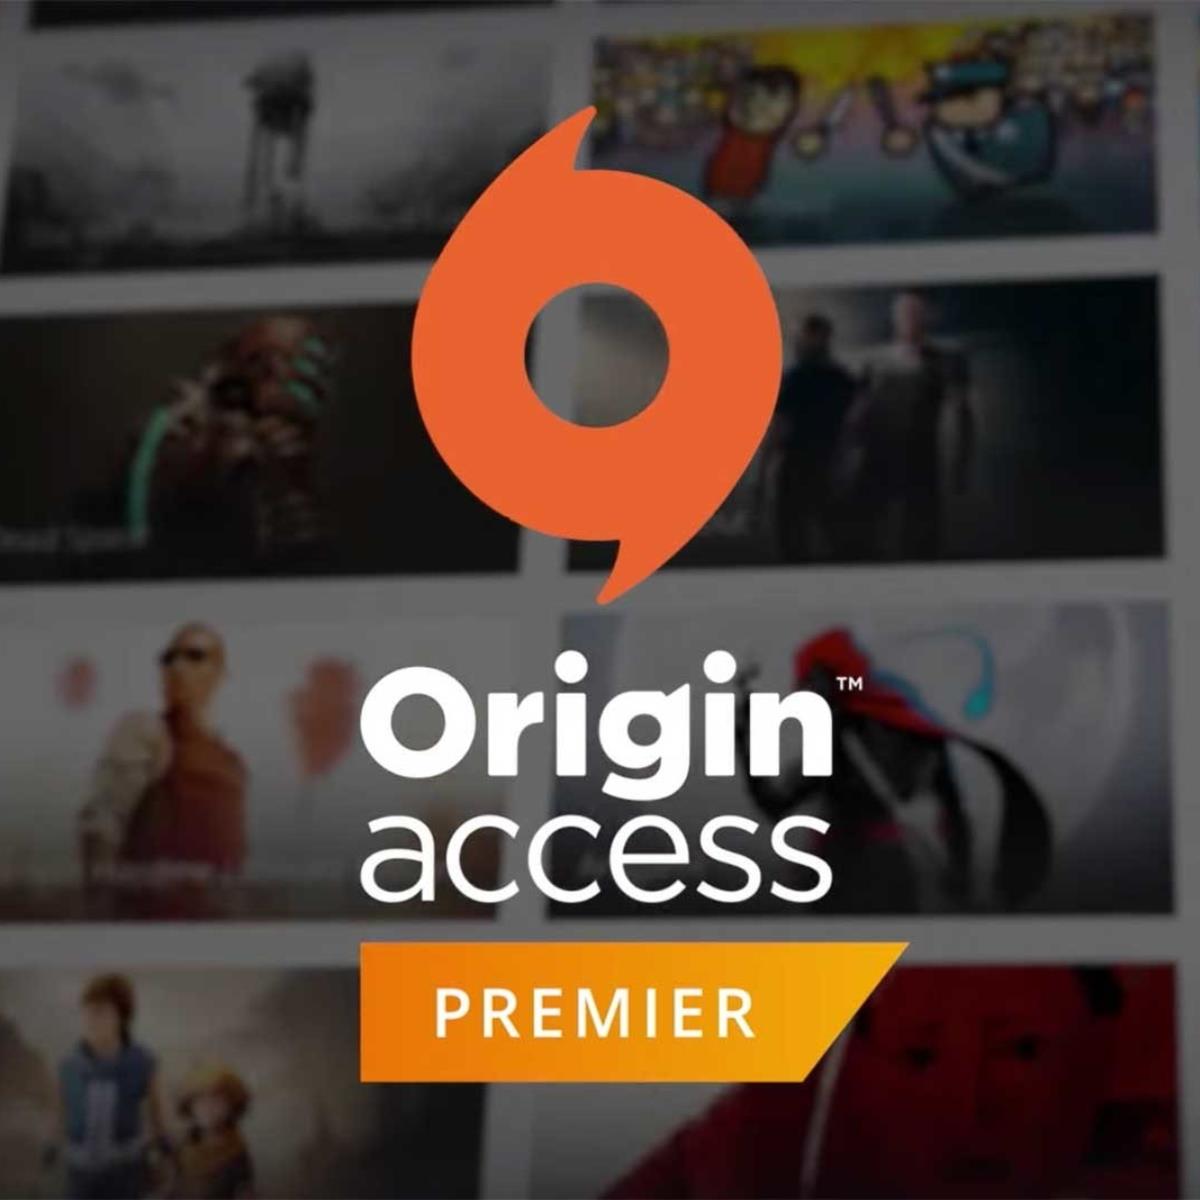 Security flaw in EA's Origin client exposed gamers to hackers